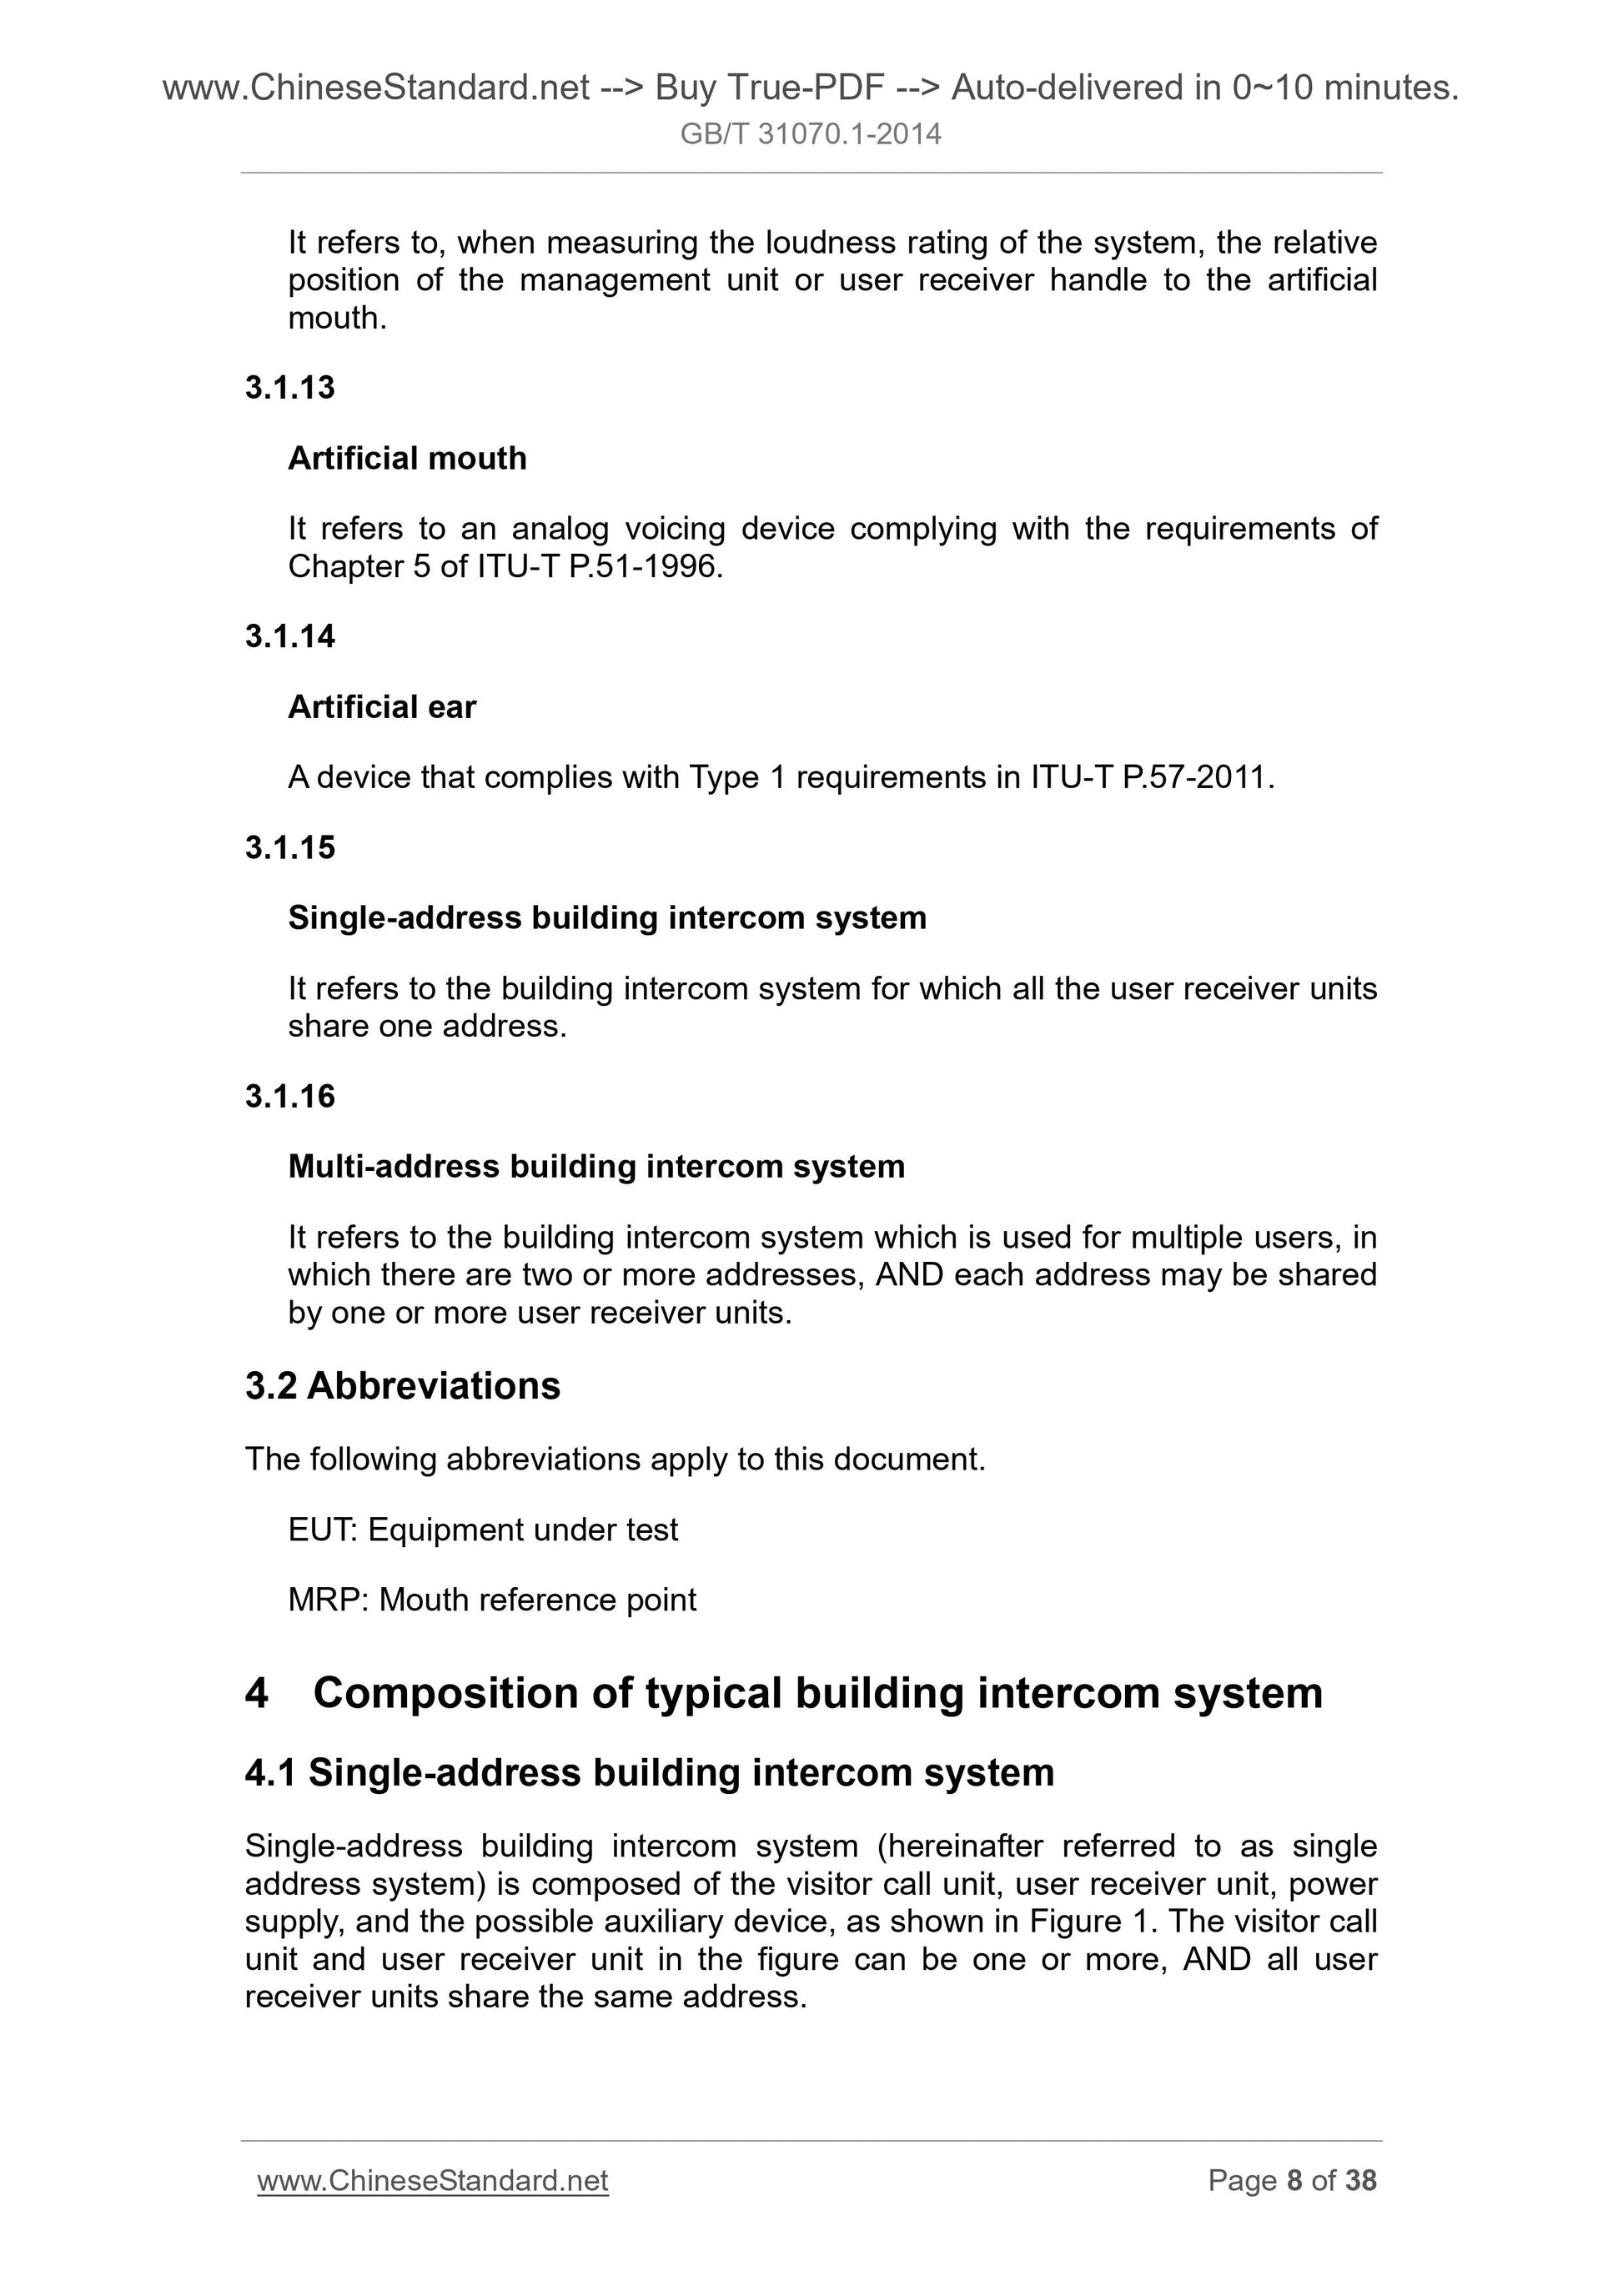 GB/T 31070.1-2014 Page 6